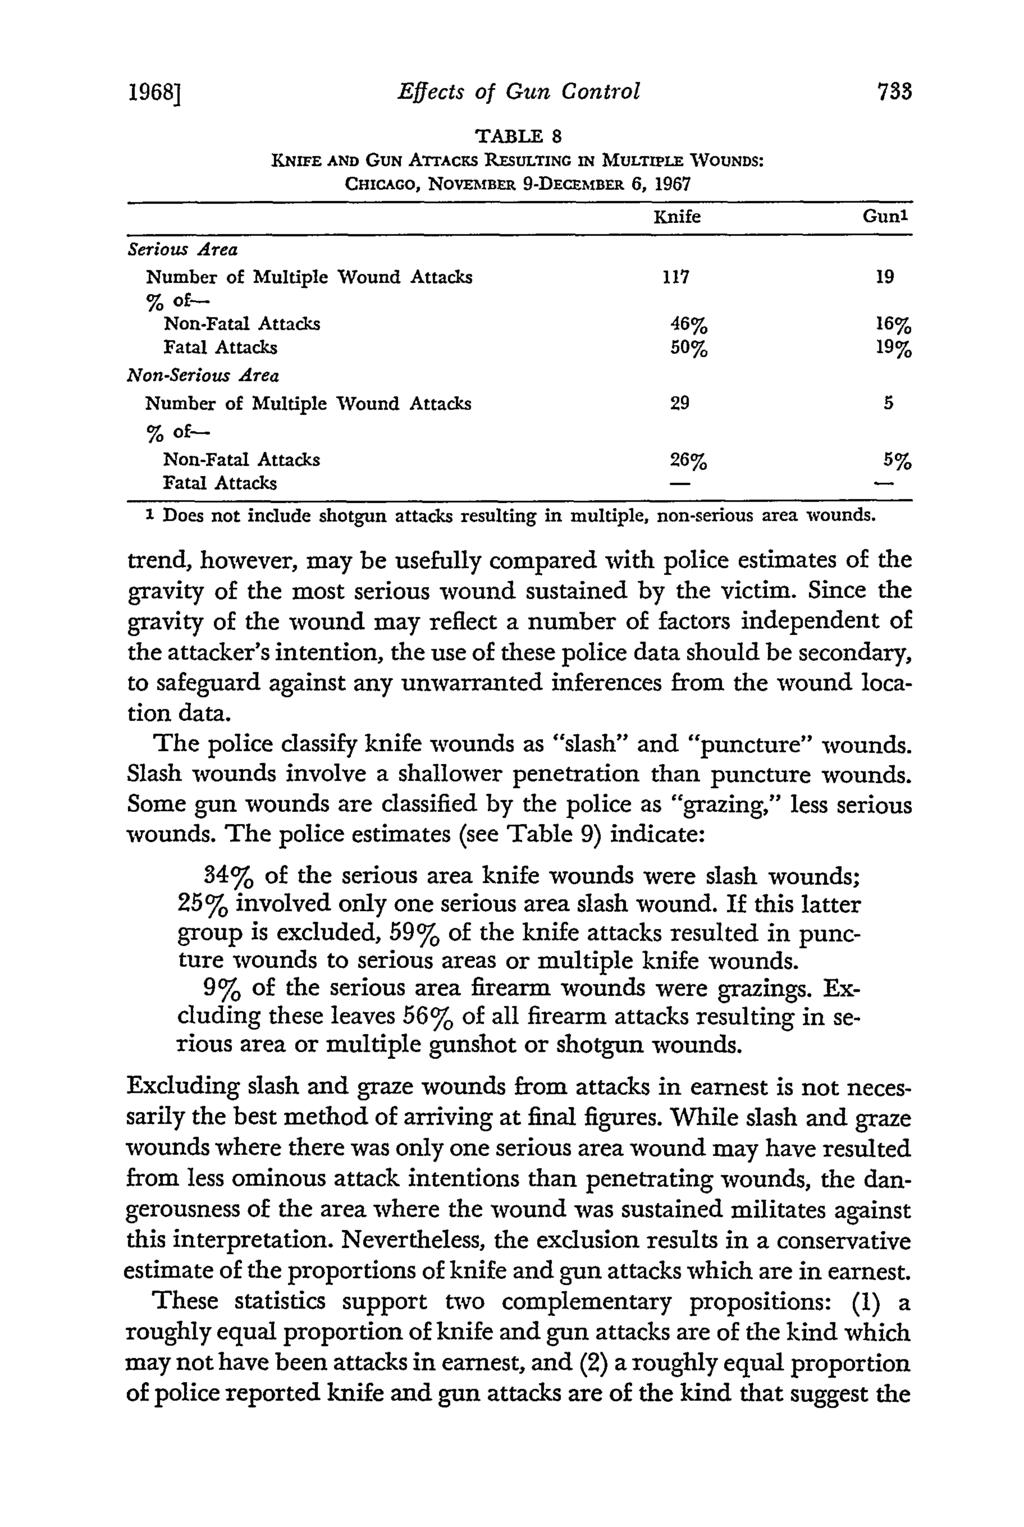 1968] Effects of Gun Control TABLE 8 KNIFE AND GUN ATTACKs RESULTING IN MULTIPLE WOUNDS: CHICAGO, NovEMBER 9-DECEMBER 6, 1967 Knife Serious Area Number of Multiple Wound Attacks 117 19 Gunl Non-Fatal